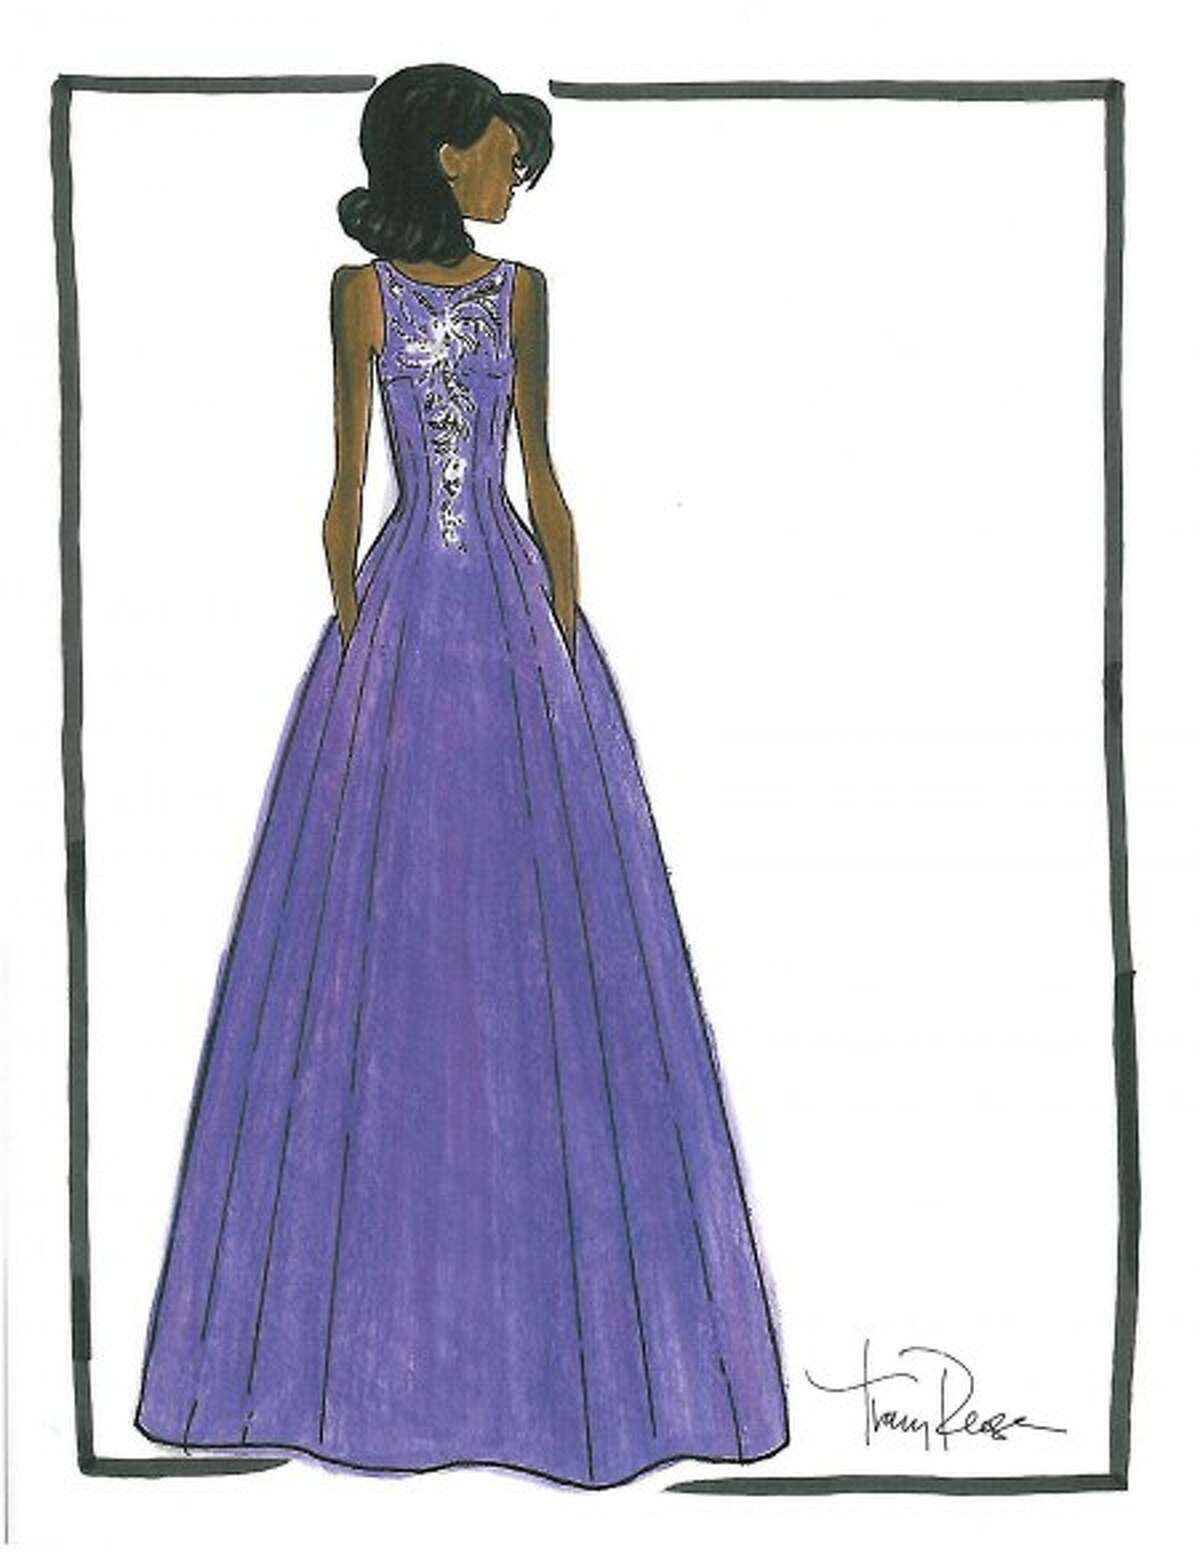 A ball gown design by Tracy Reese as a possible inaugural dress for Michelle Obama. (AP Photo/Tracy Reese)